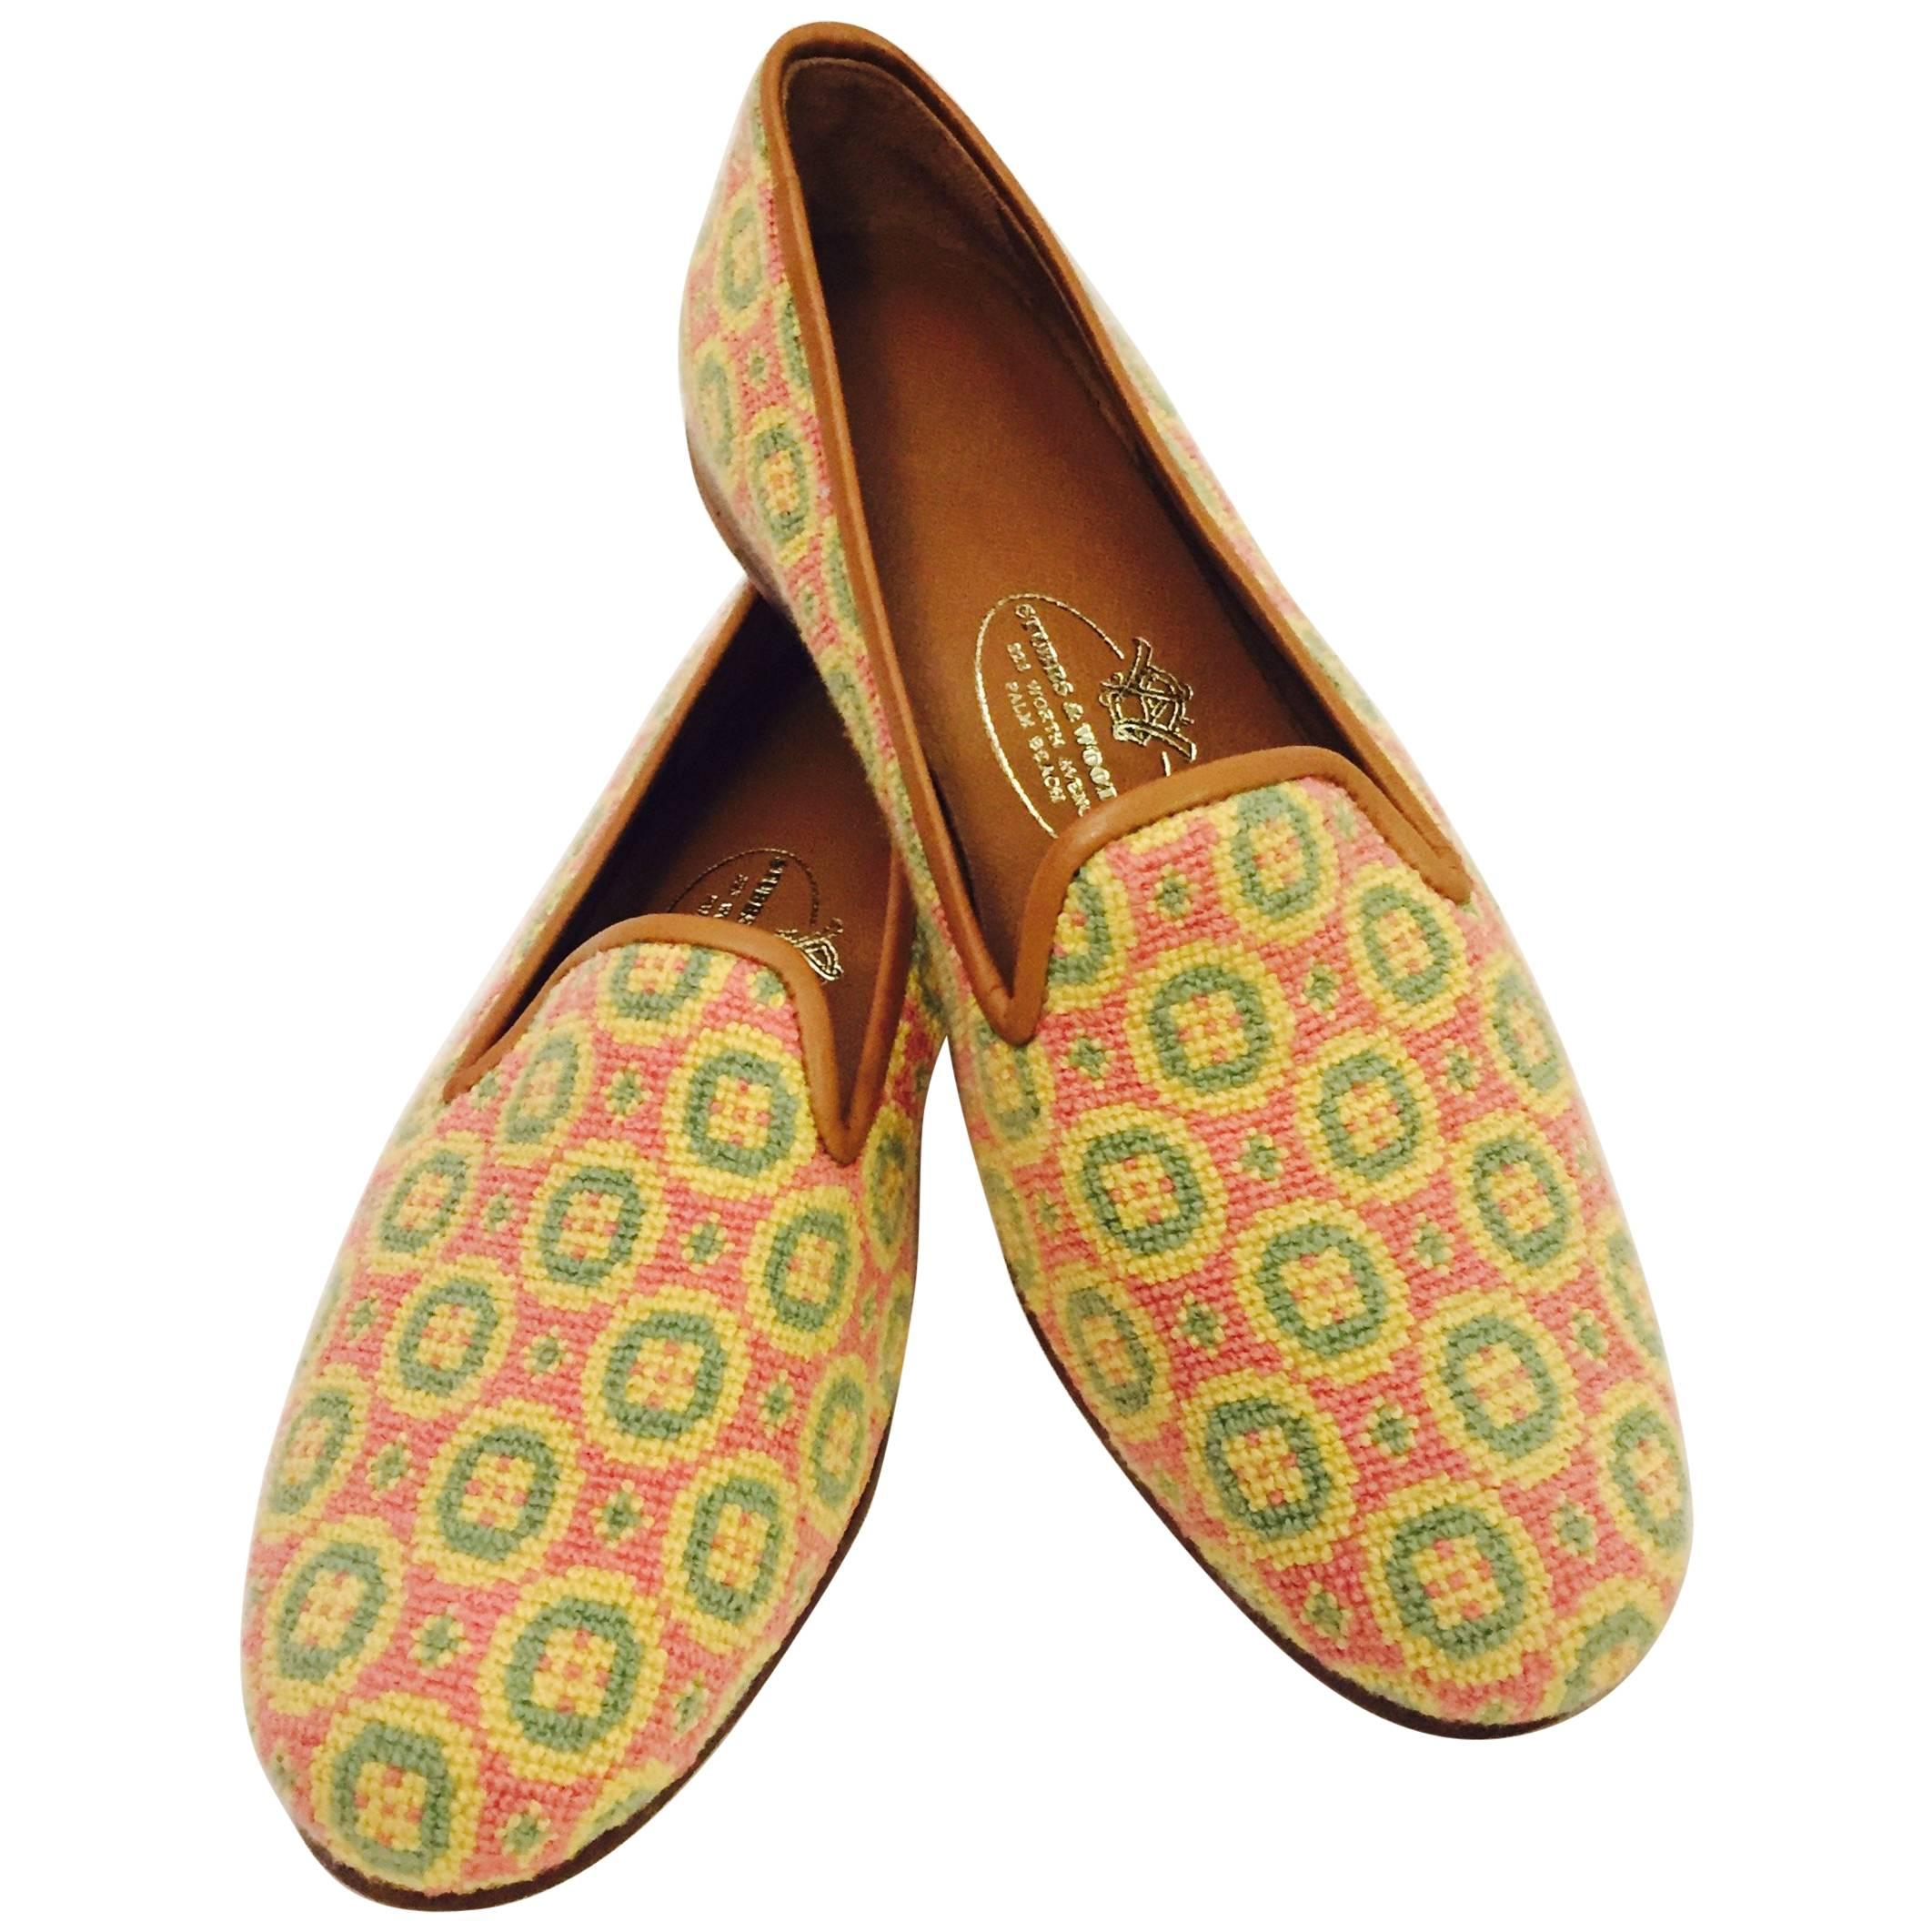 Stubbs & Wootton Sensible Needlepoint Fabric Slippers in Yellow Pink and Green 